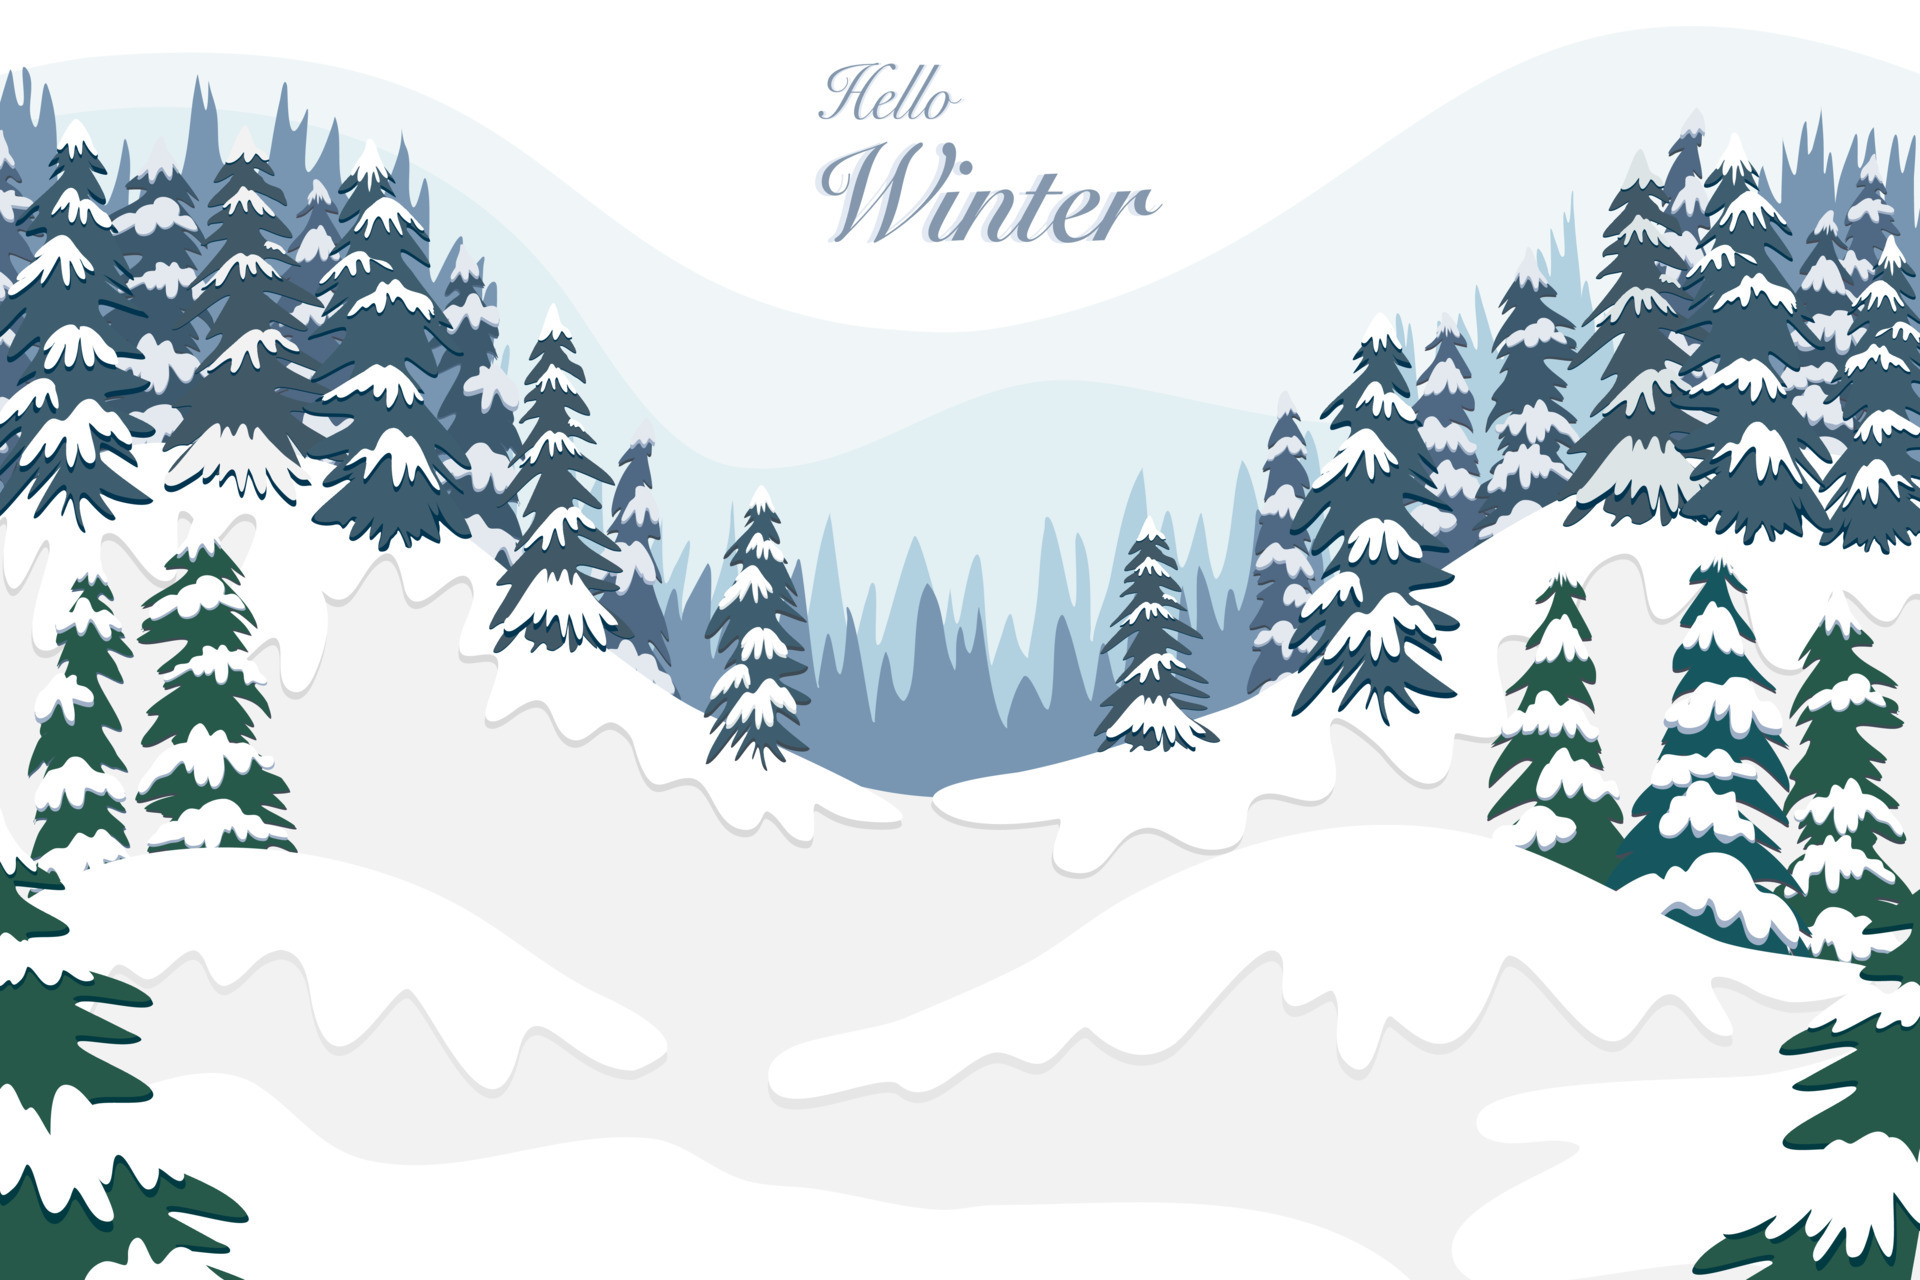 Vector of winter season view drawing, landscape of blue and green pine  trees forest on mountain cover by white snow with hello winter letters for  holidays postcard, invitation background 13569200 Vector Art